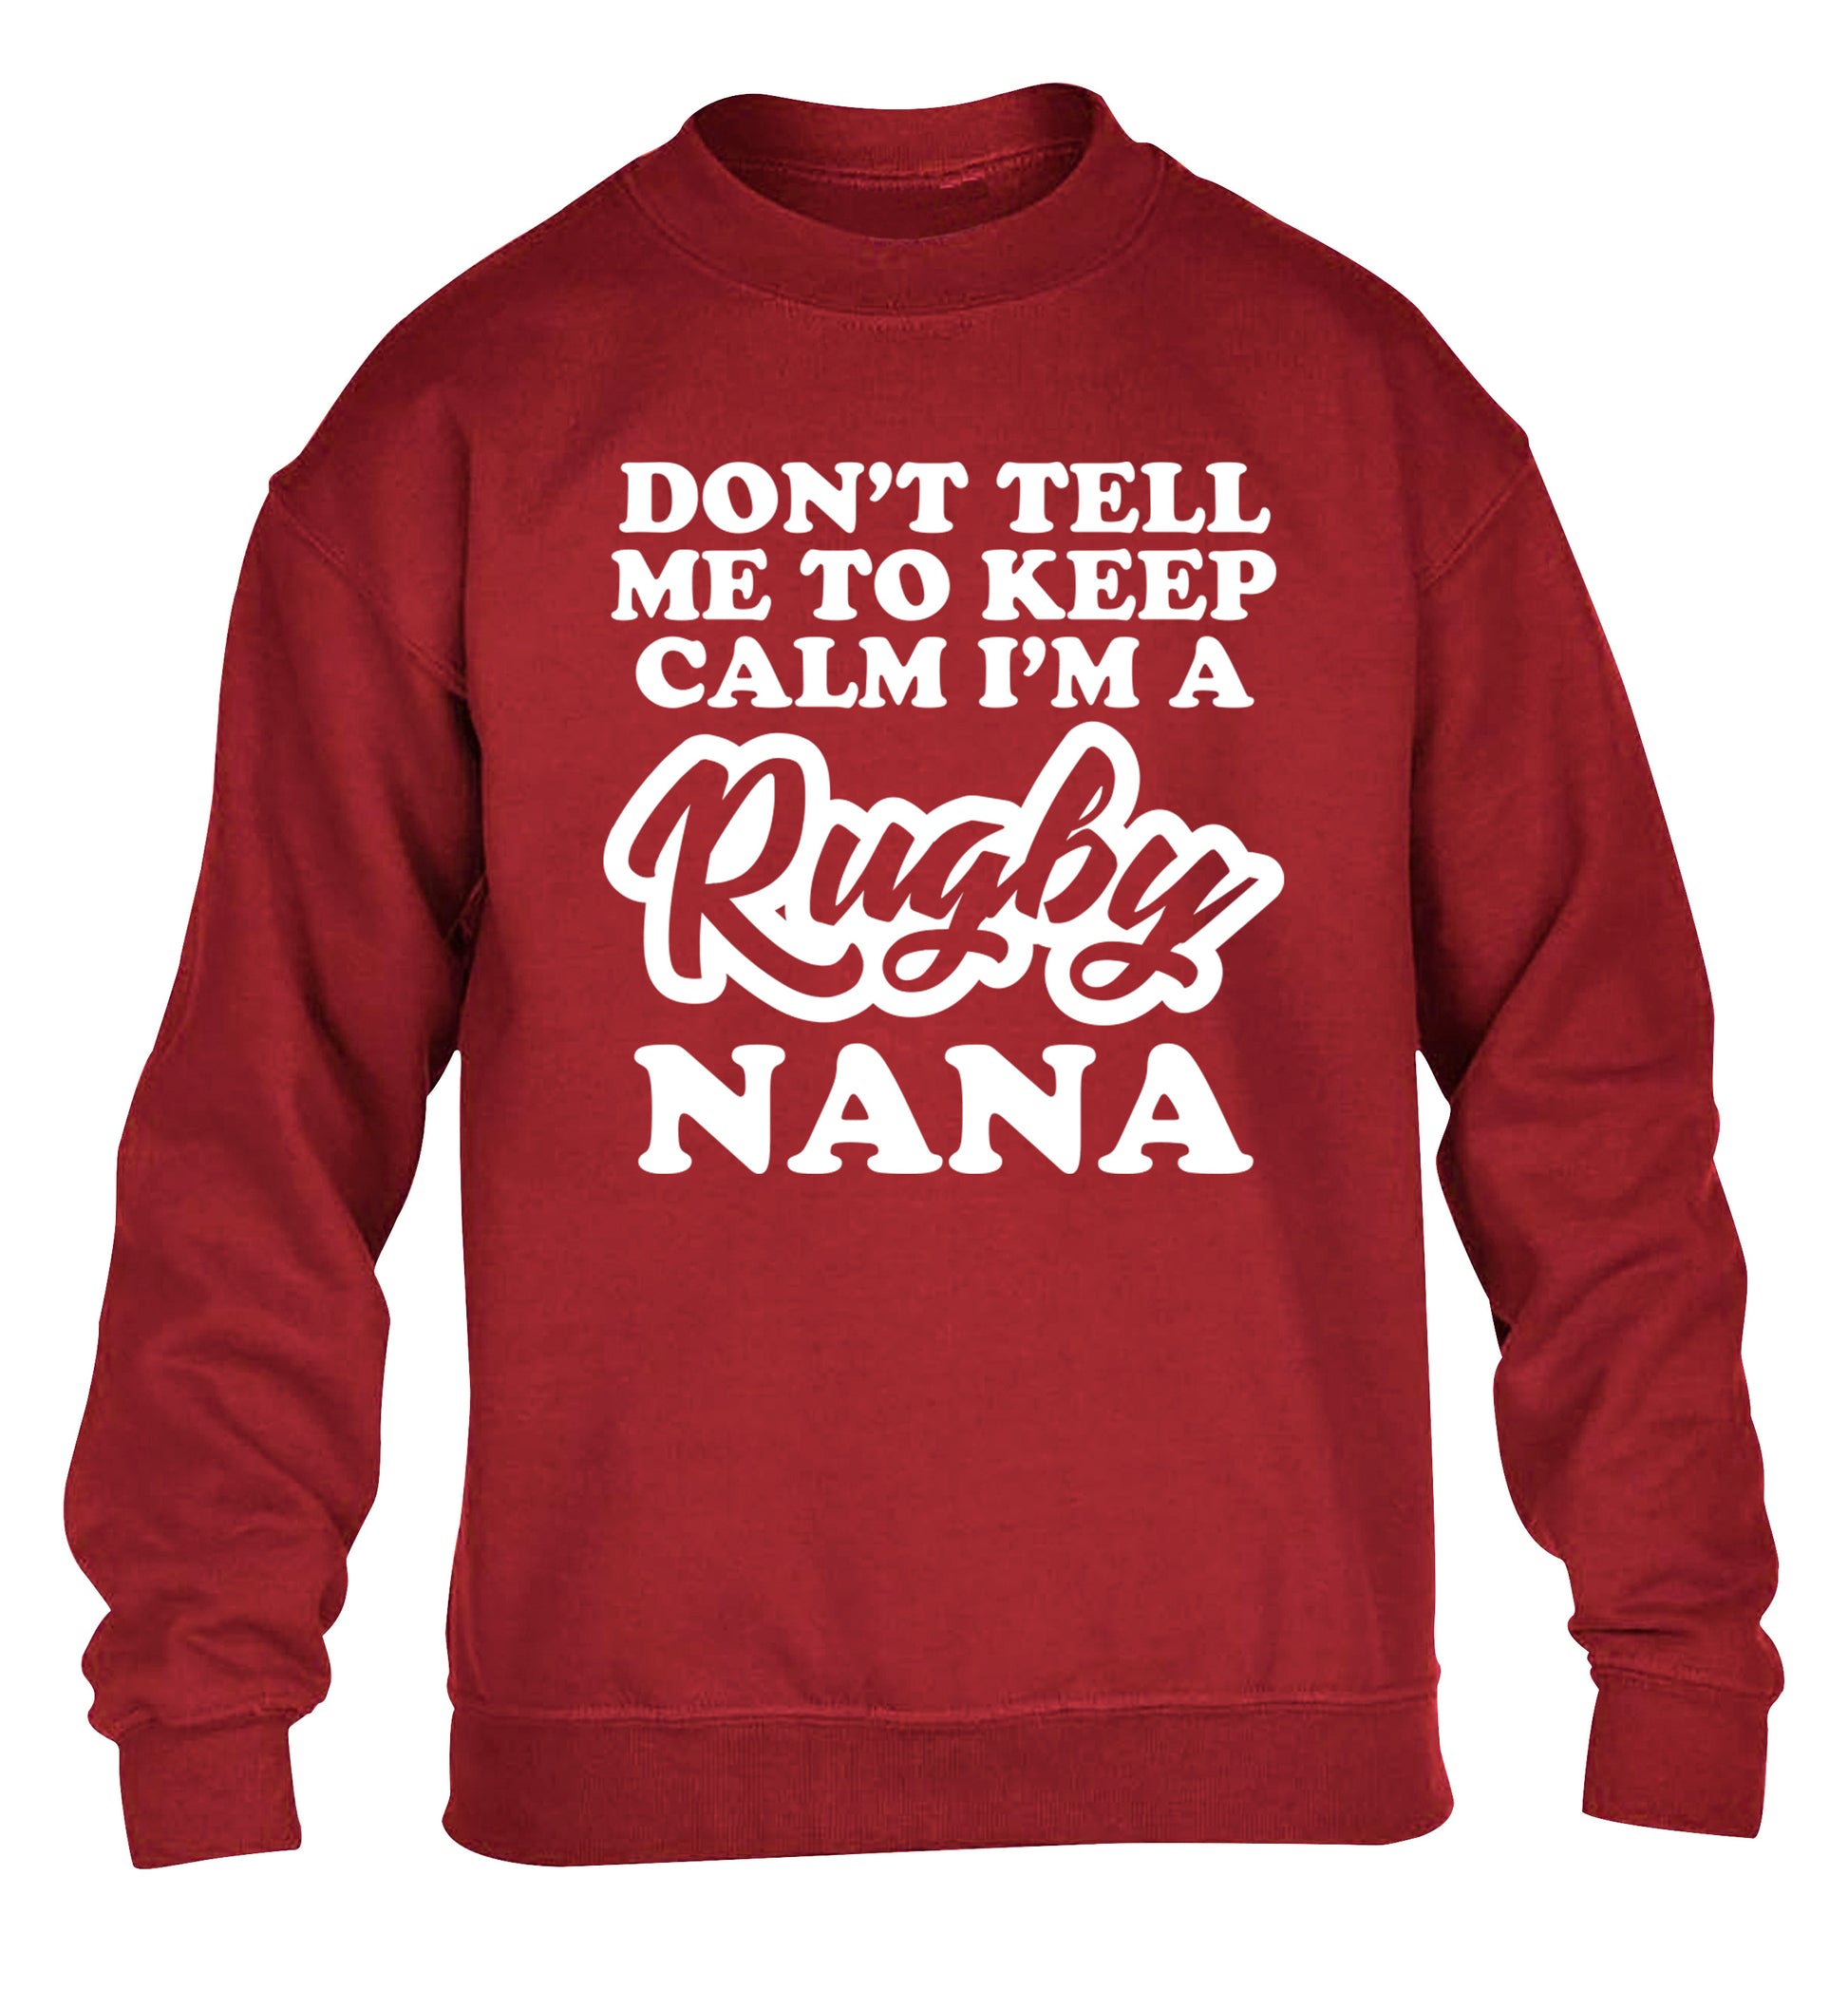 Don't tell me to keep calm I'm a rugby nana children's grey sweater 12-13 Years